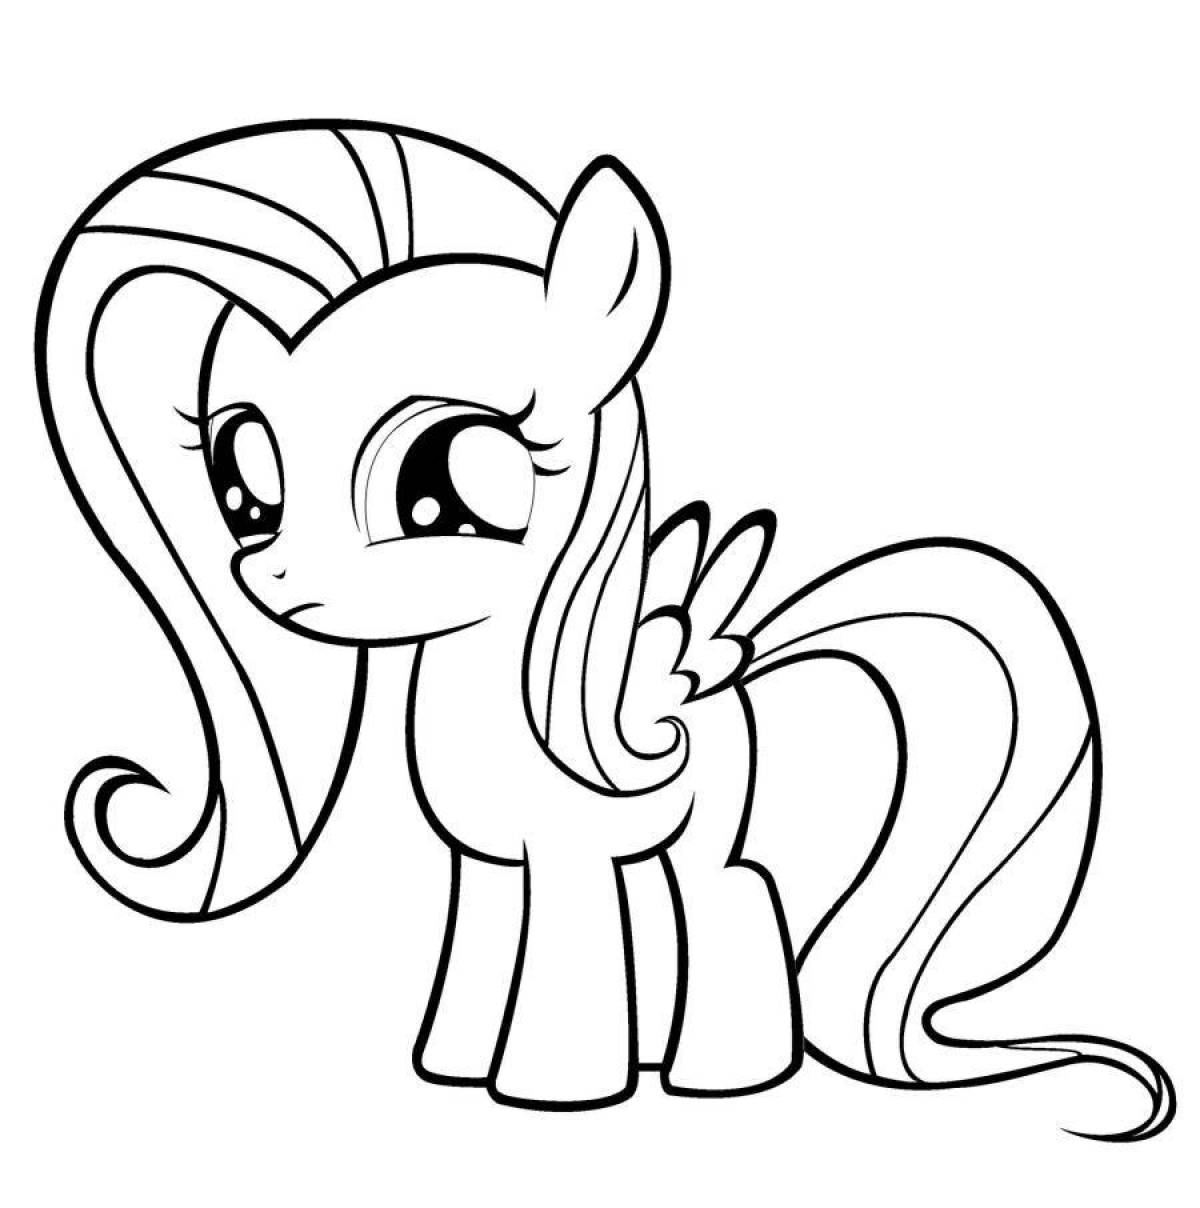 Glowing pony coloring page